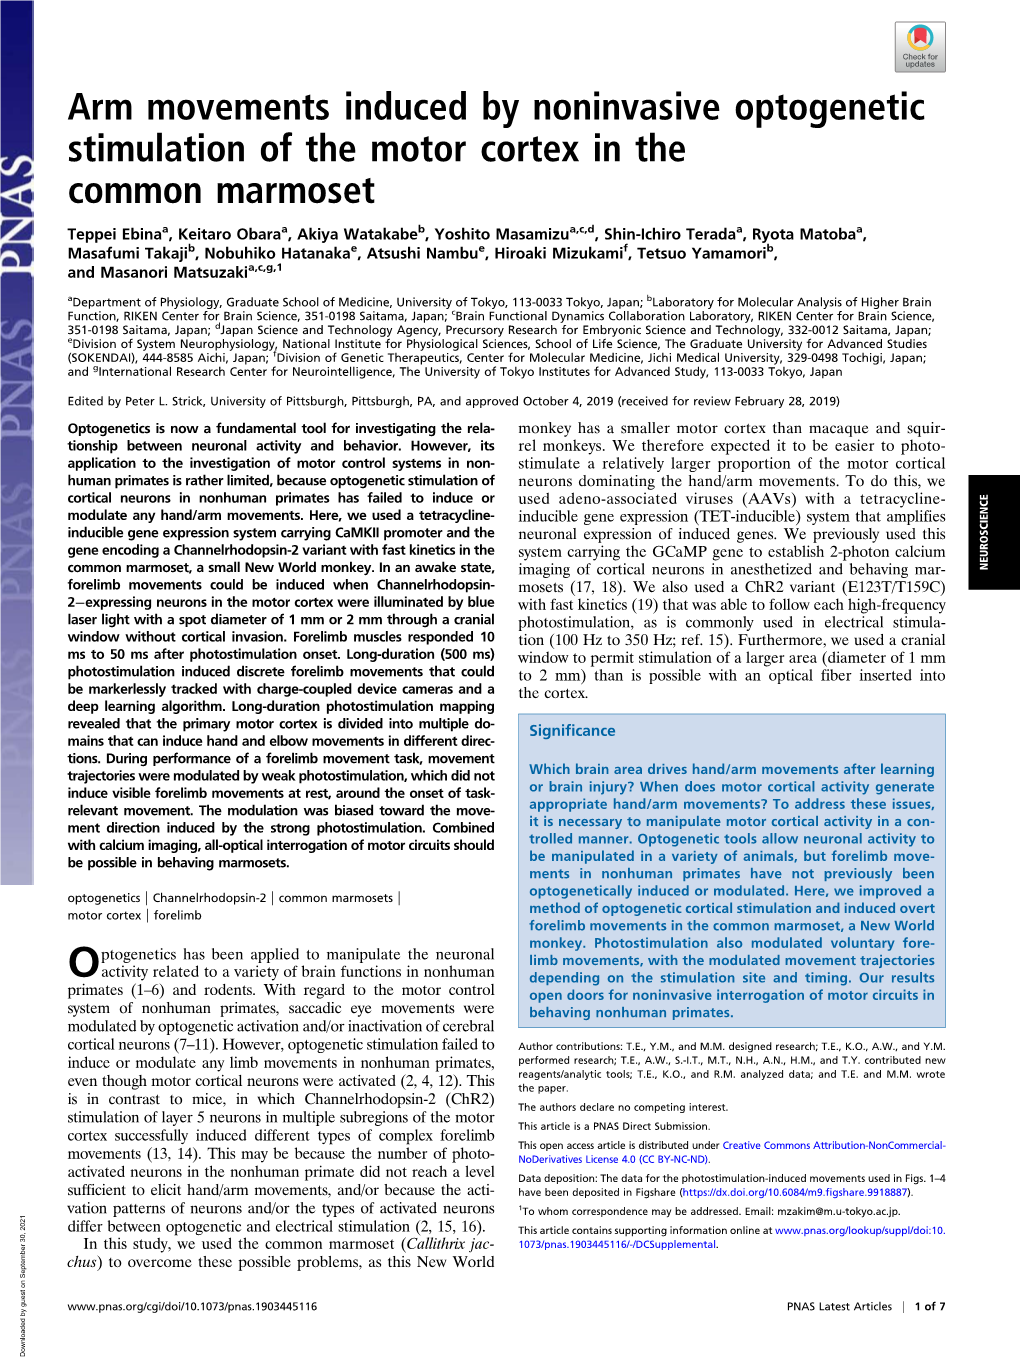 Arm Movements Induced by Noninvasive Optogenetic Stimulation of the Motor Cortex in the Common Marmoset